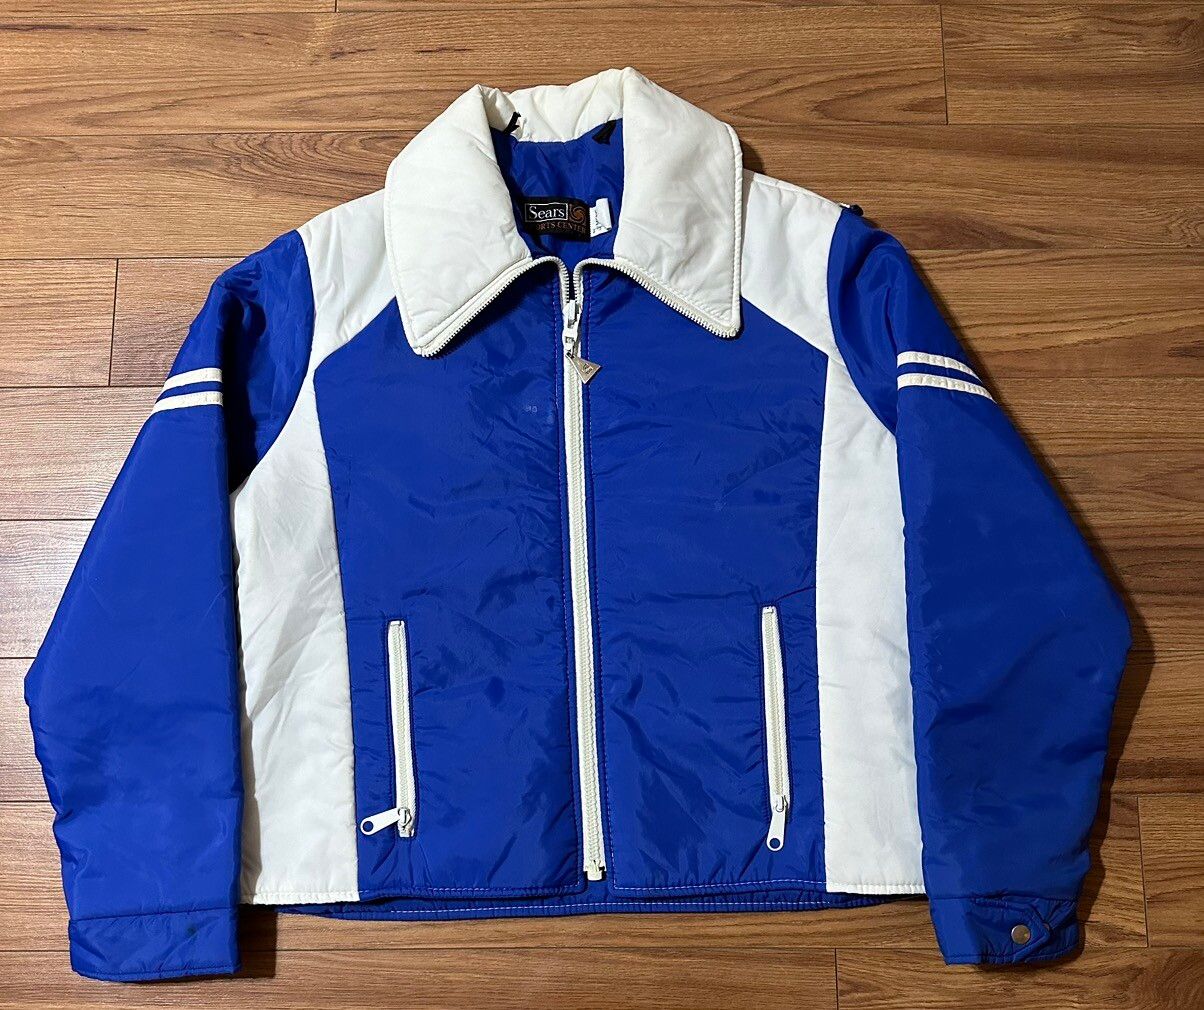 Vintage 1970s USA Made Sears Sportscenter Blue/White Zip up Jacket L Size US L / EU 52-54 / 3 - 1 Preview